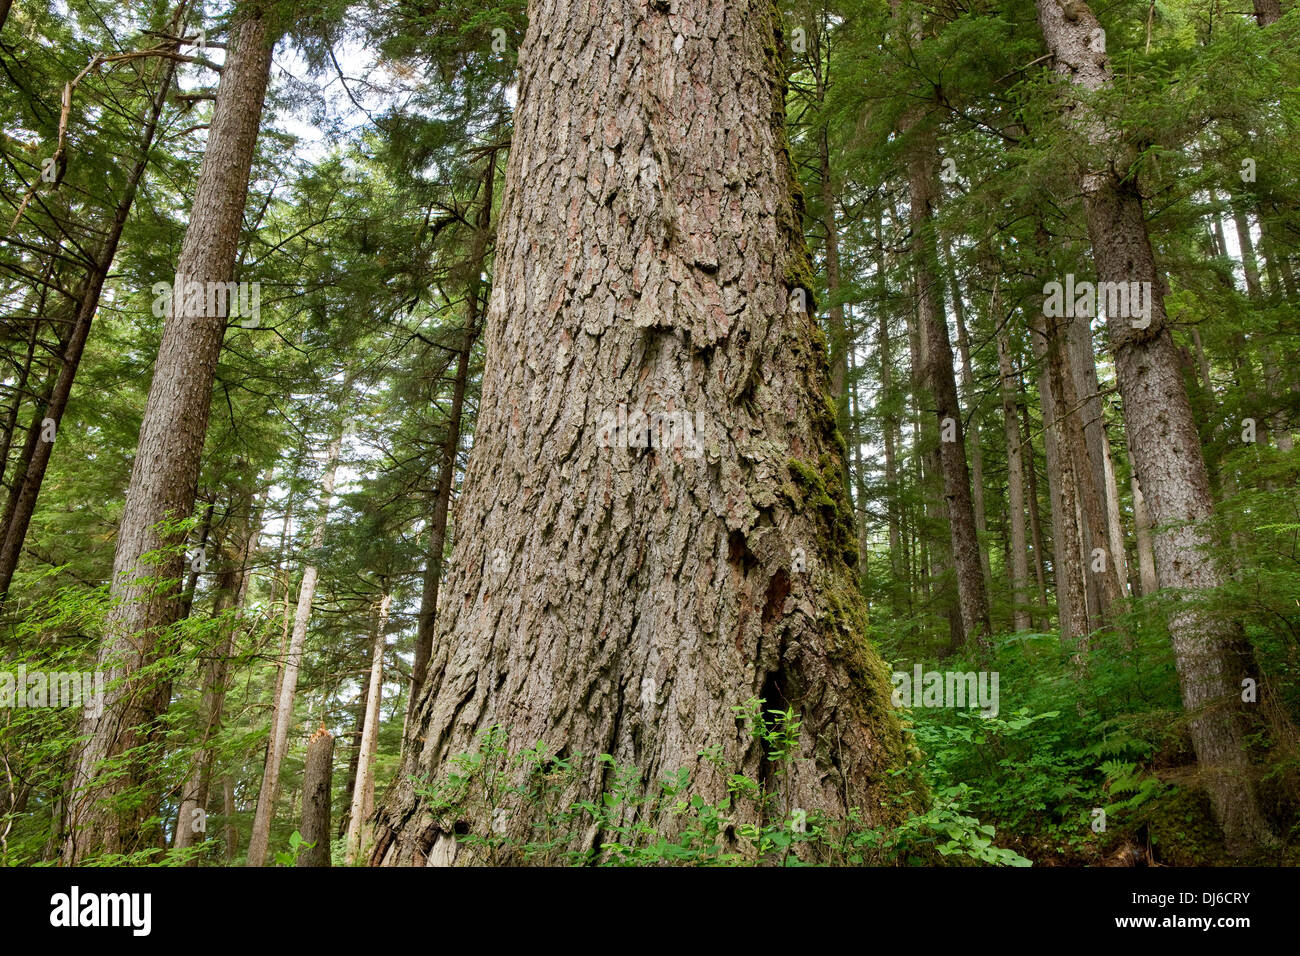 Large Old Growth Sitka Spruce And Western Hemlock Dominate In A Typical Old Growth Forest In Alaska's Tongass National Forest Stock Photo